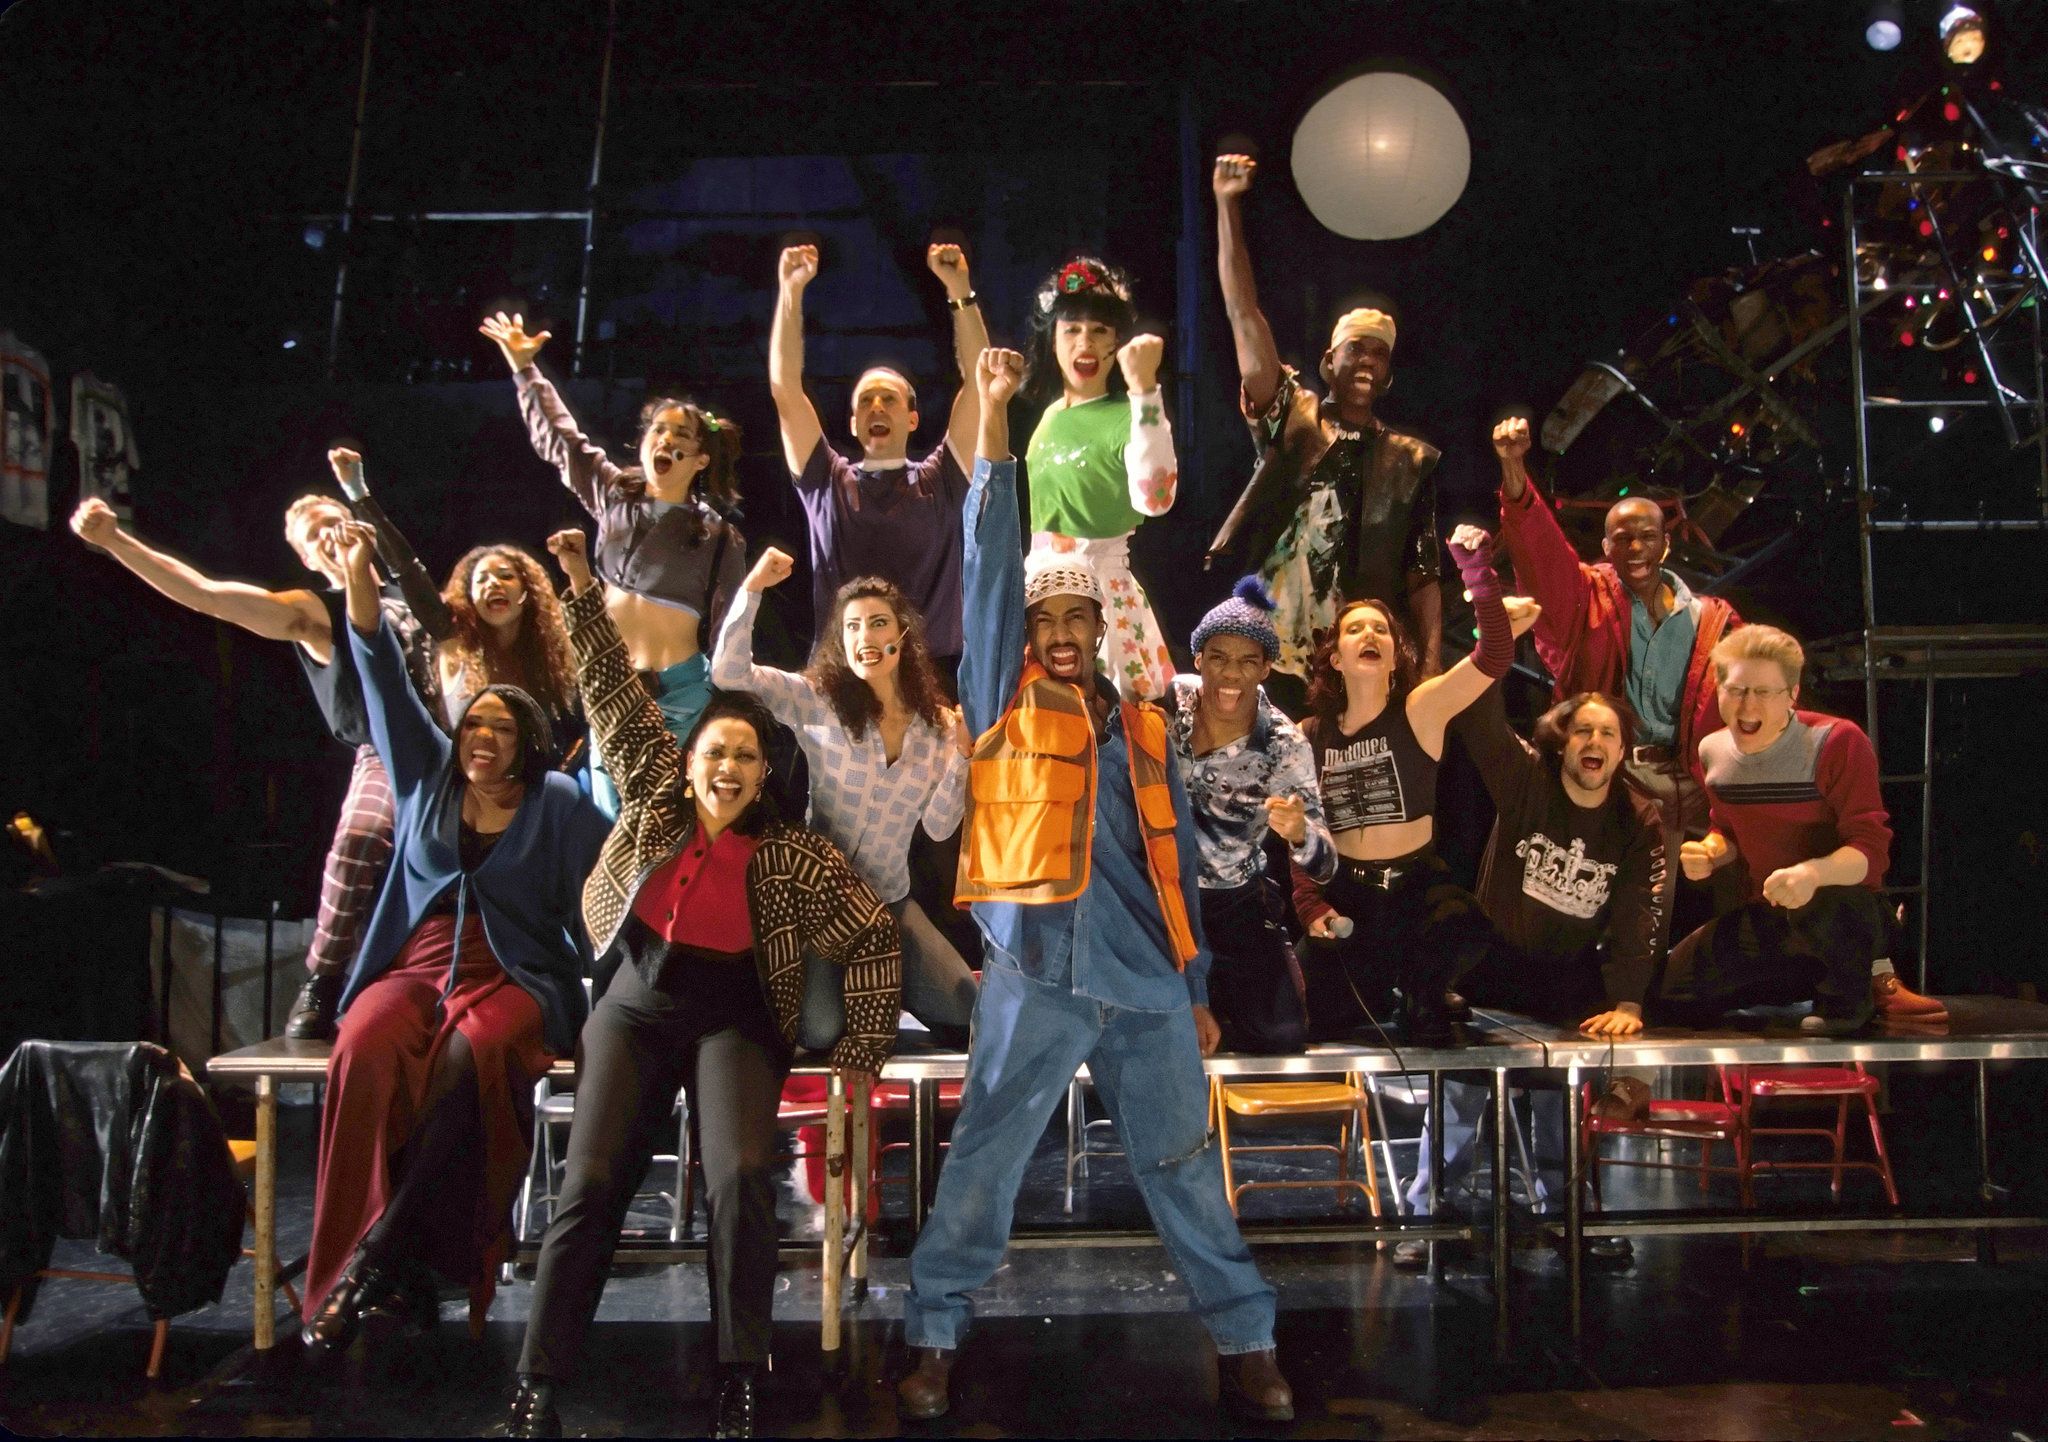 Rent' in Picture, in Advance of 'Rent' on TV